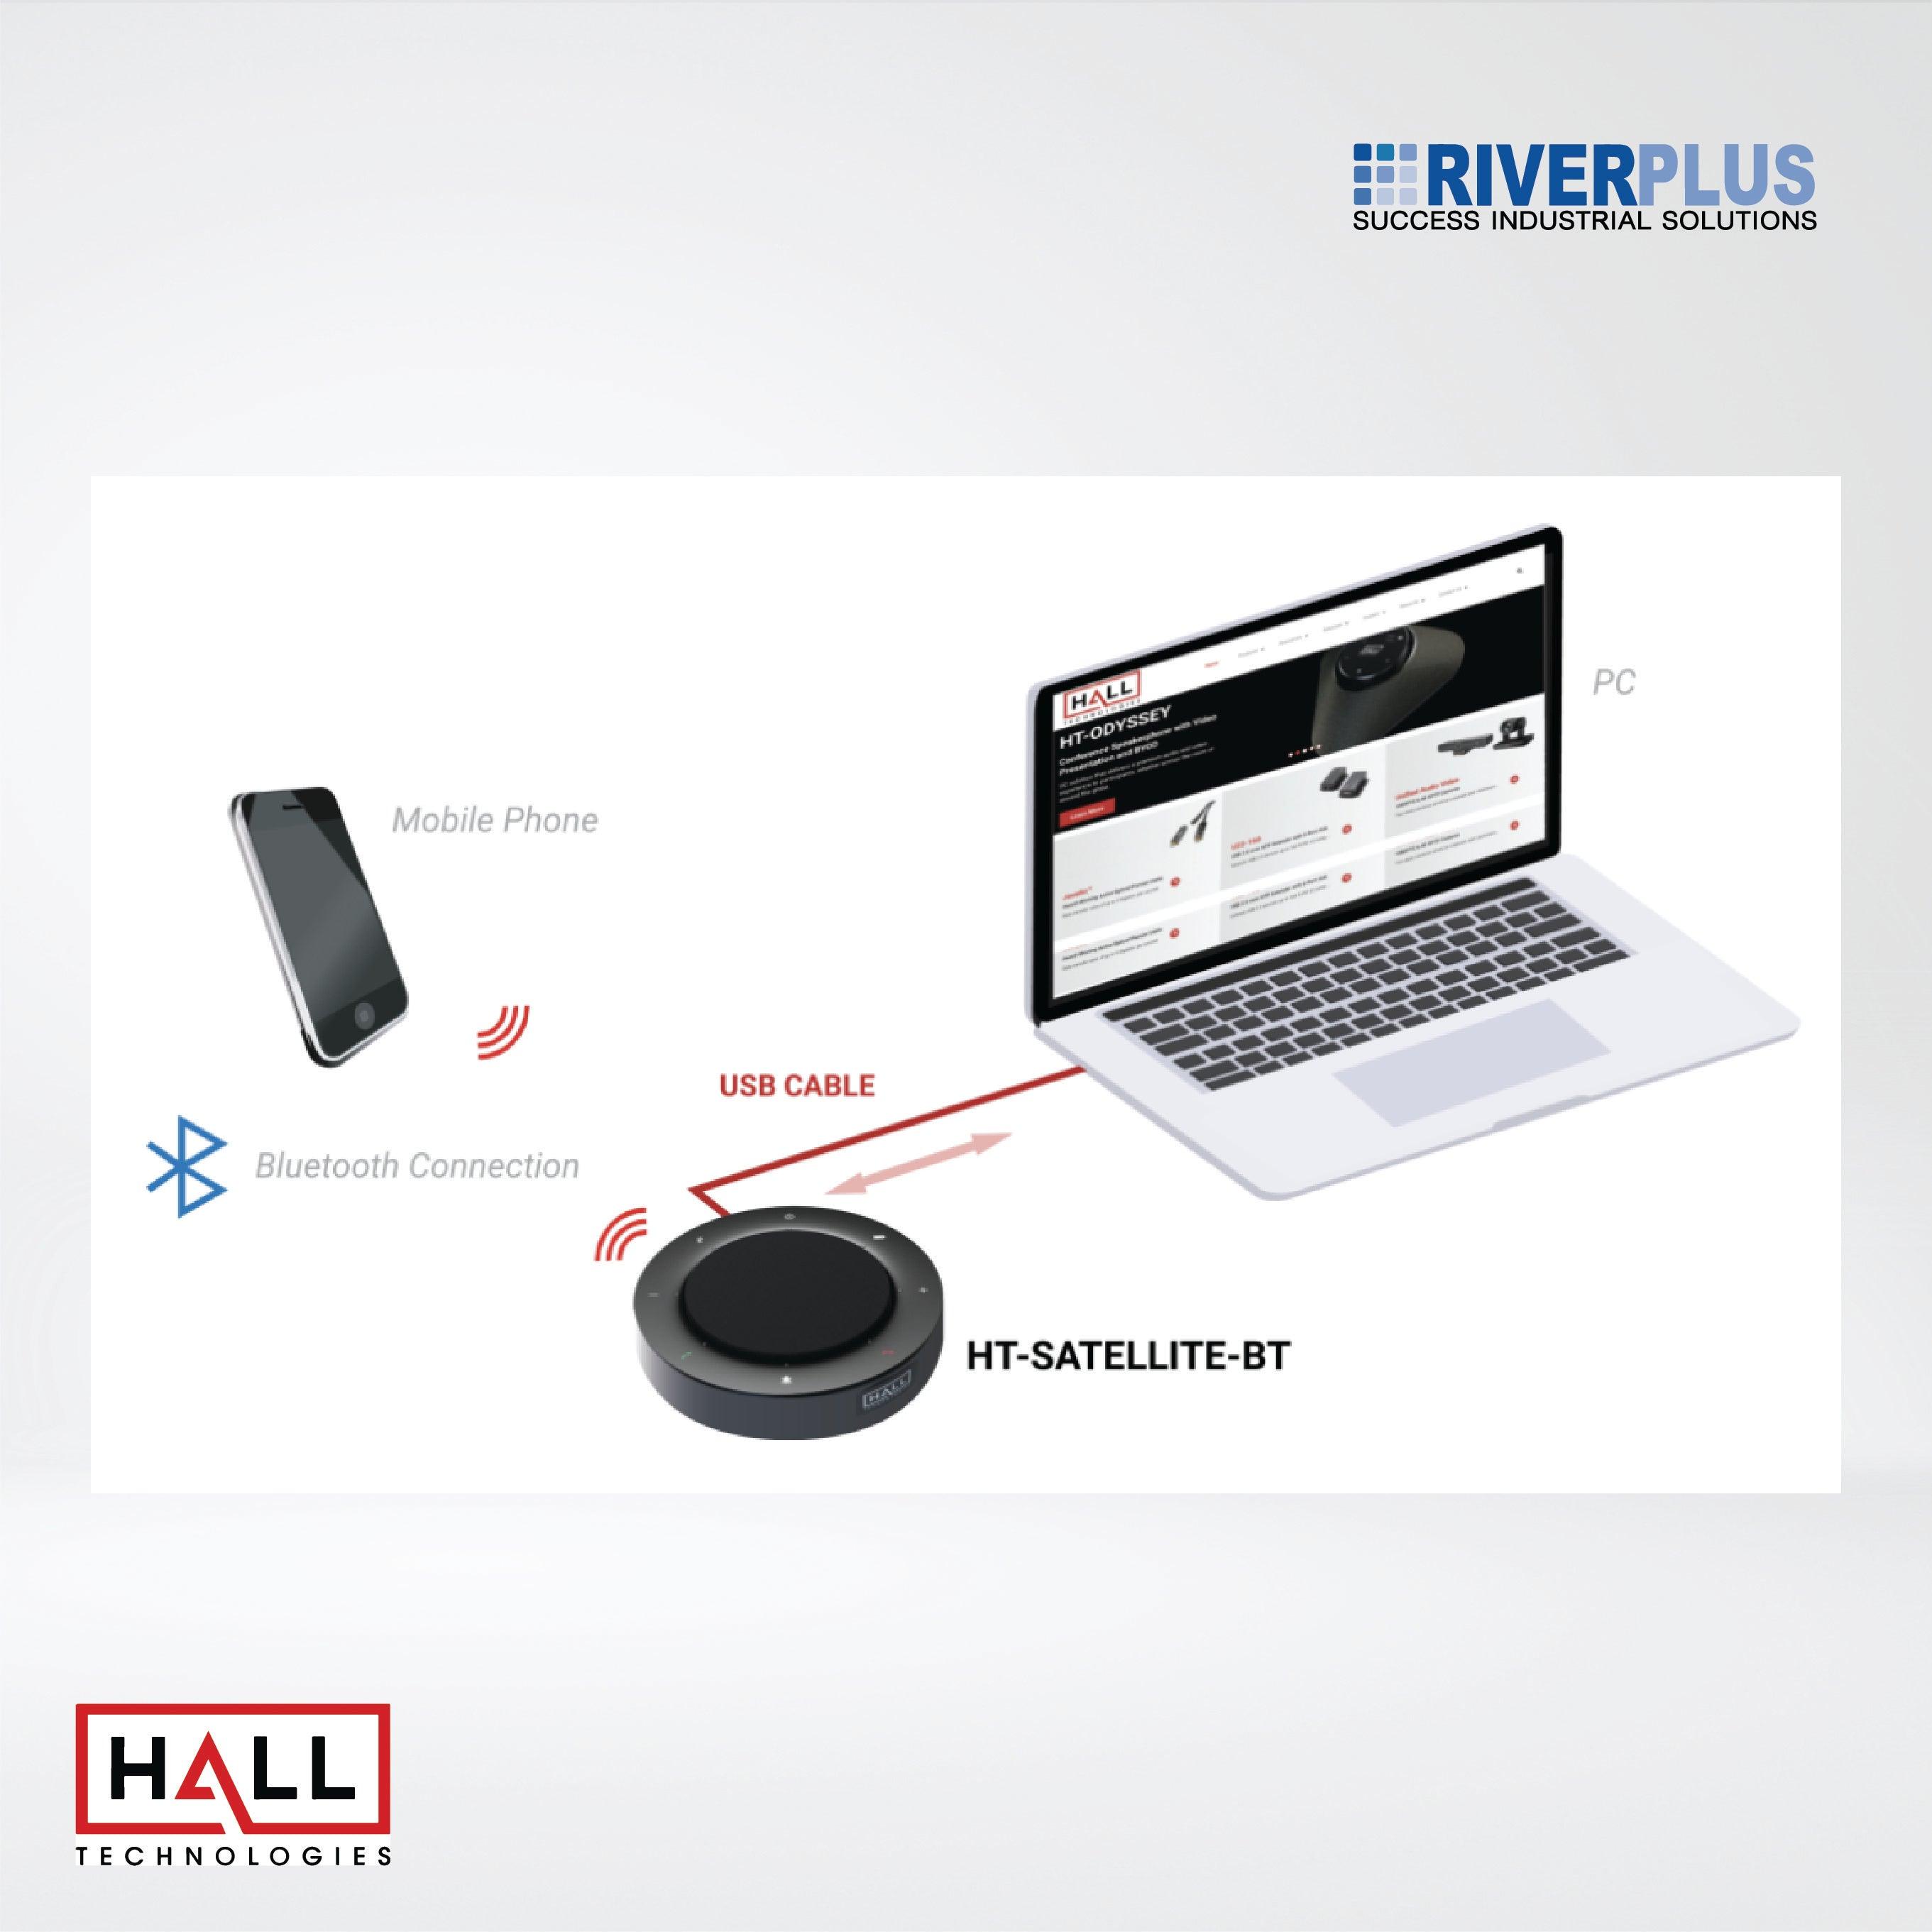 HT-SATELLITE-BT Portable USB and Bluetooth Conference Speakerphone - Riverplus